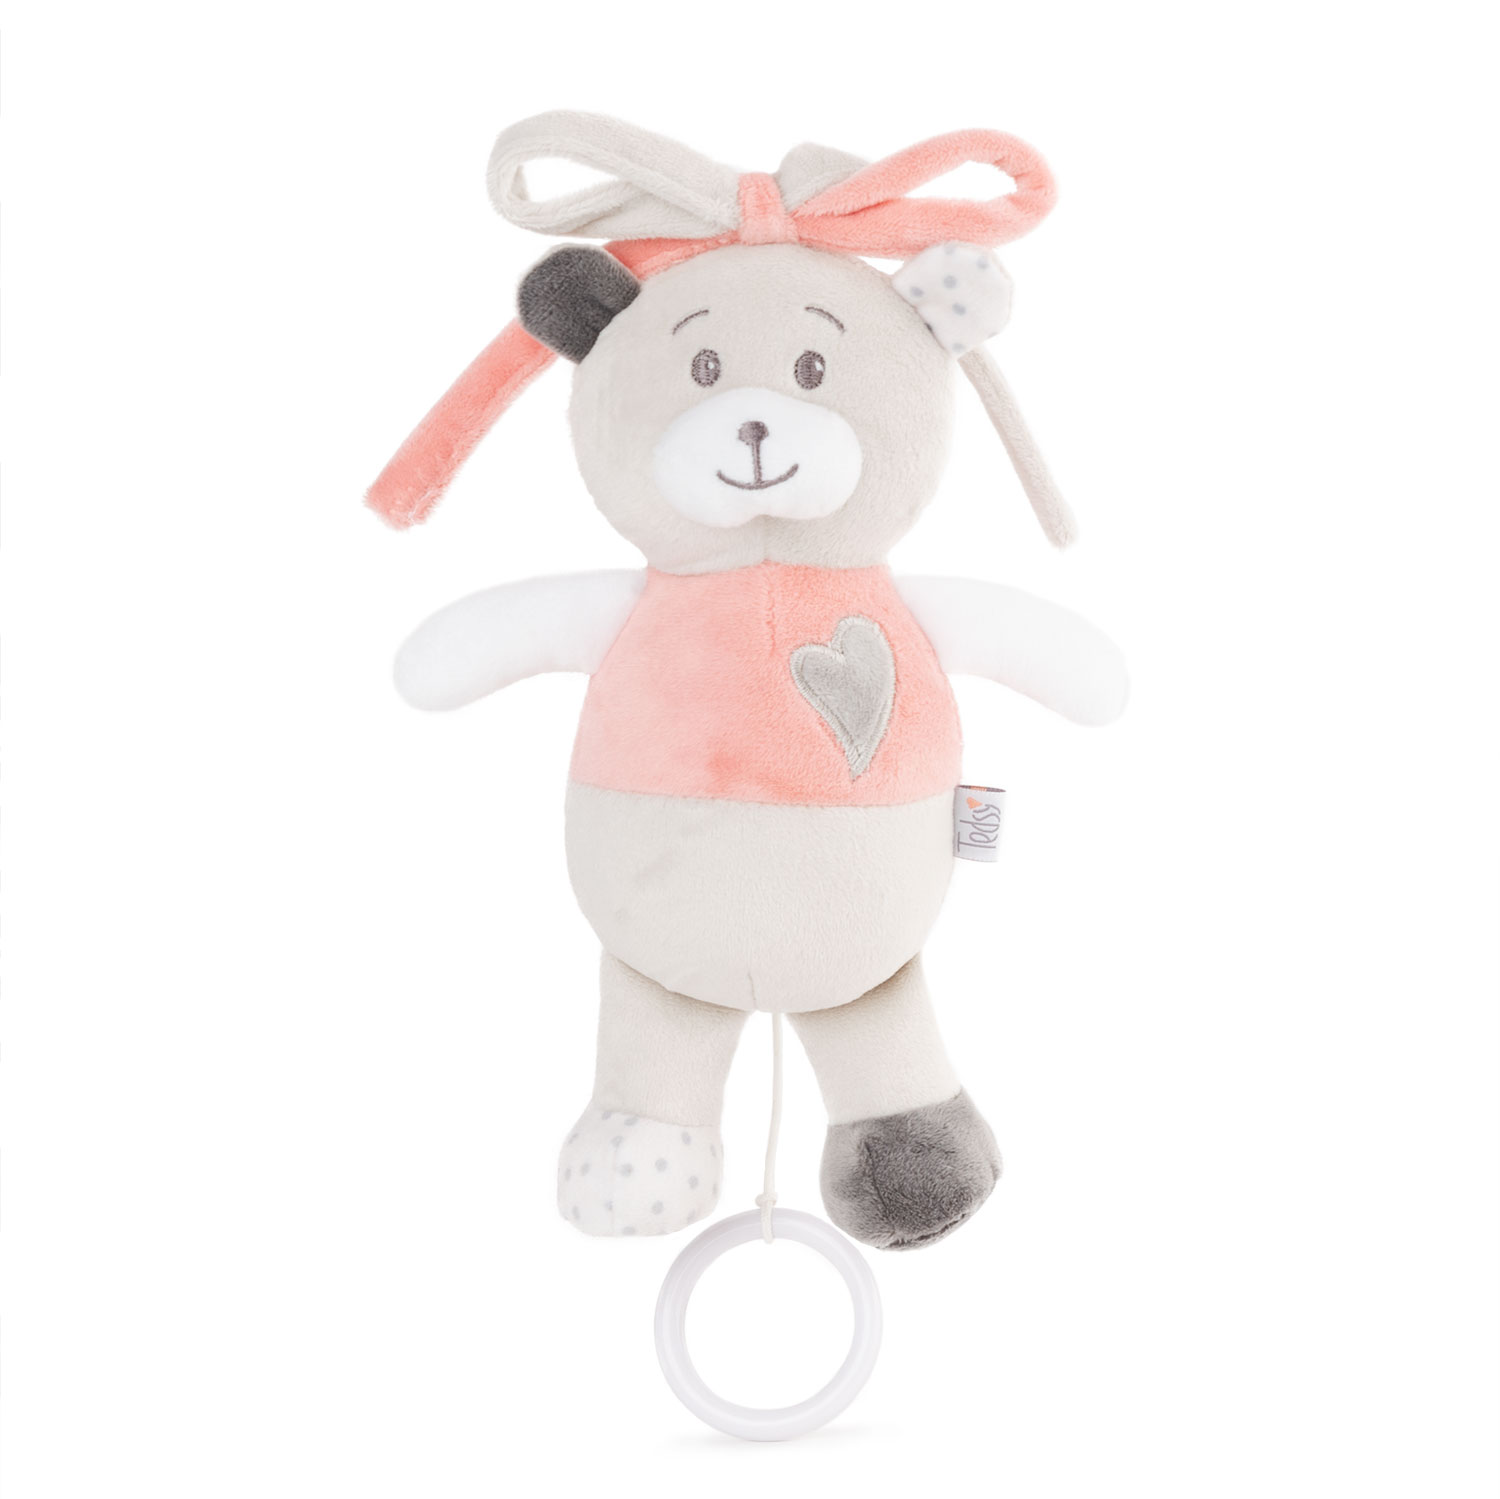 Baby Musical toy bear - Pink